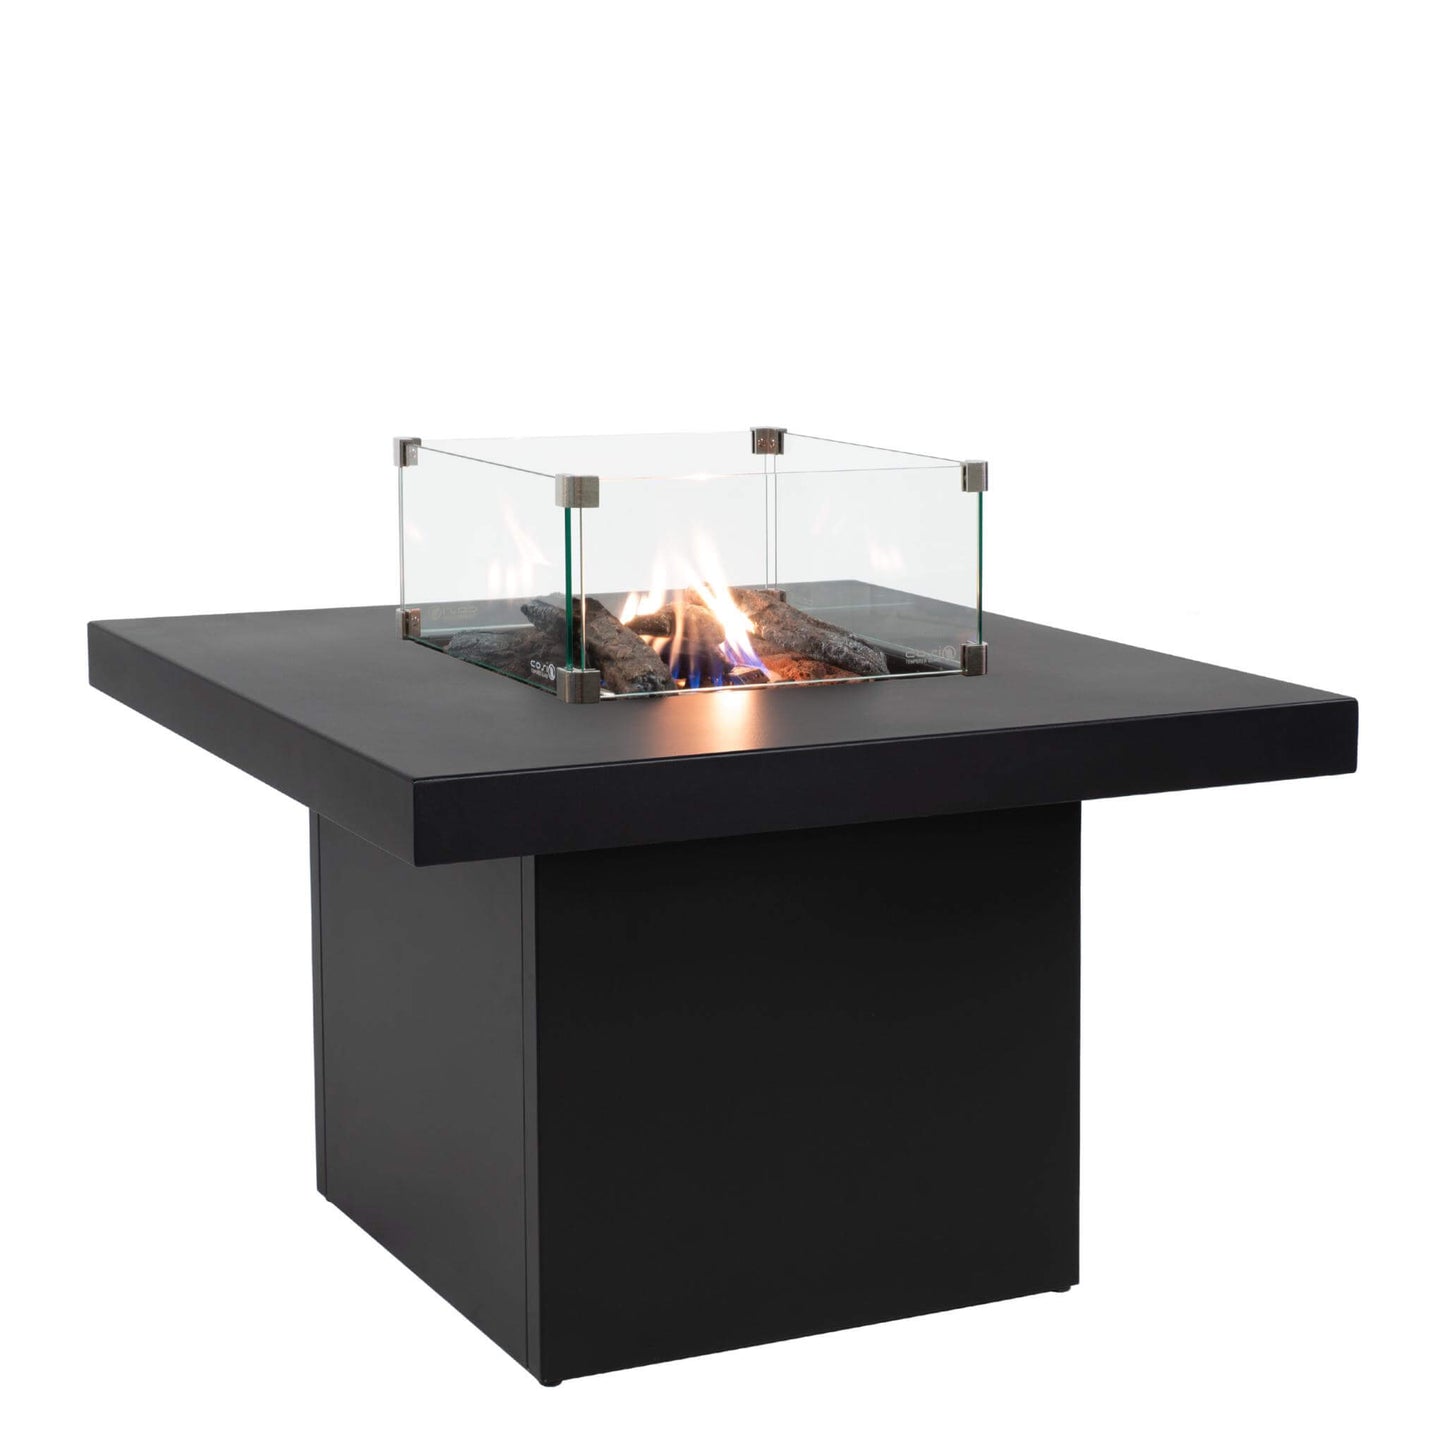 Cosibrixx 90 Anthracite Gas Fire Pit Table with lit fire and glass screen